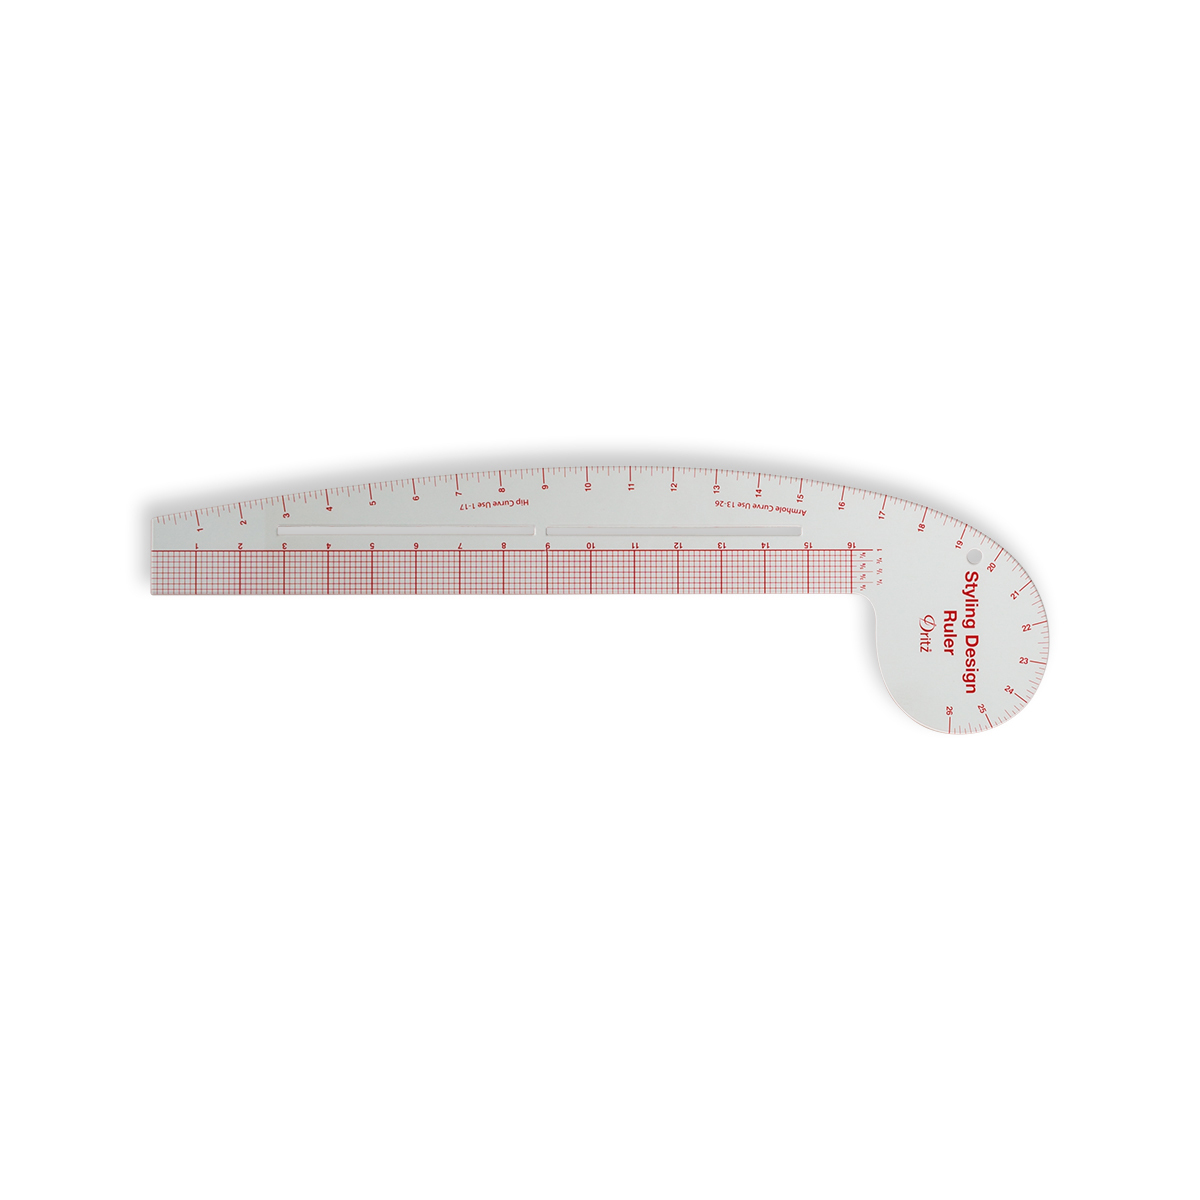 Surprise gifts high quality Dritz Design Ruler Trio, 3 Sewing